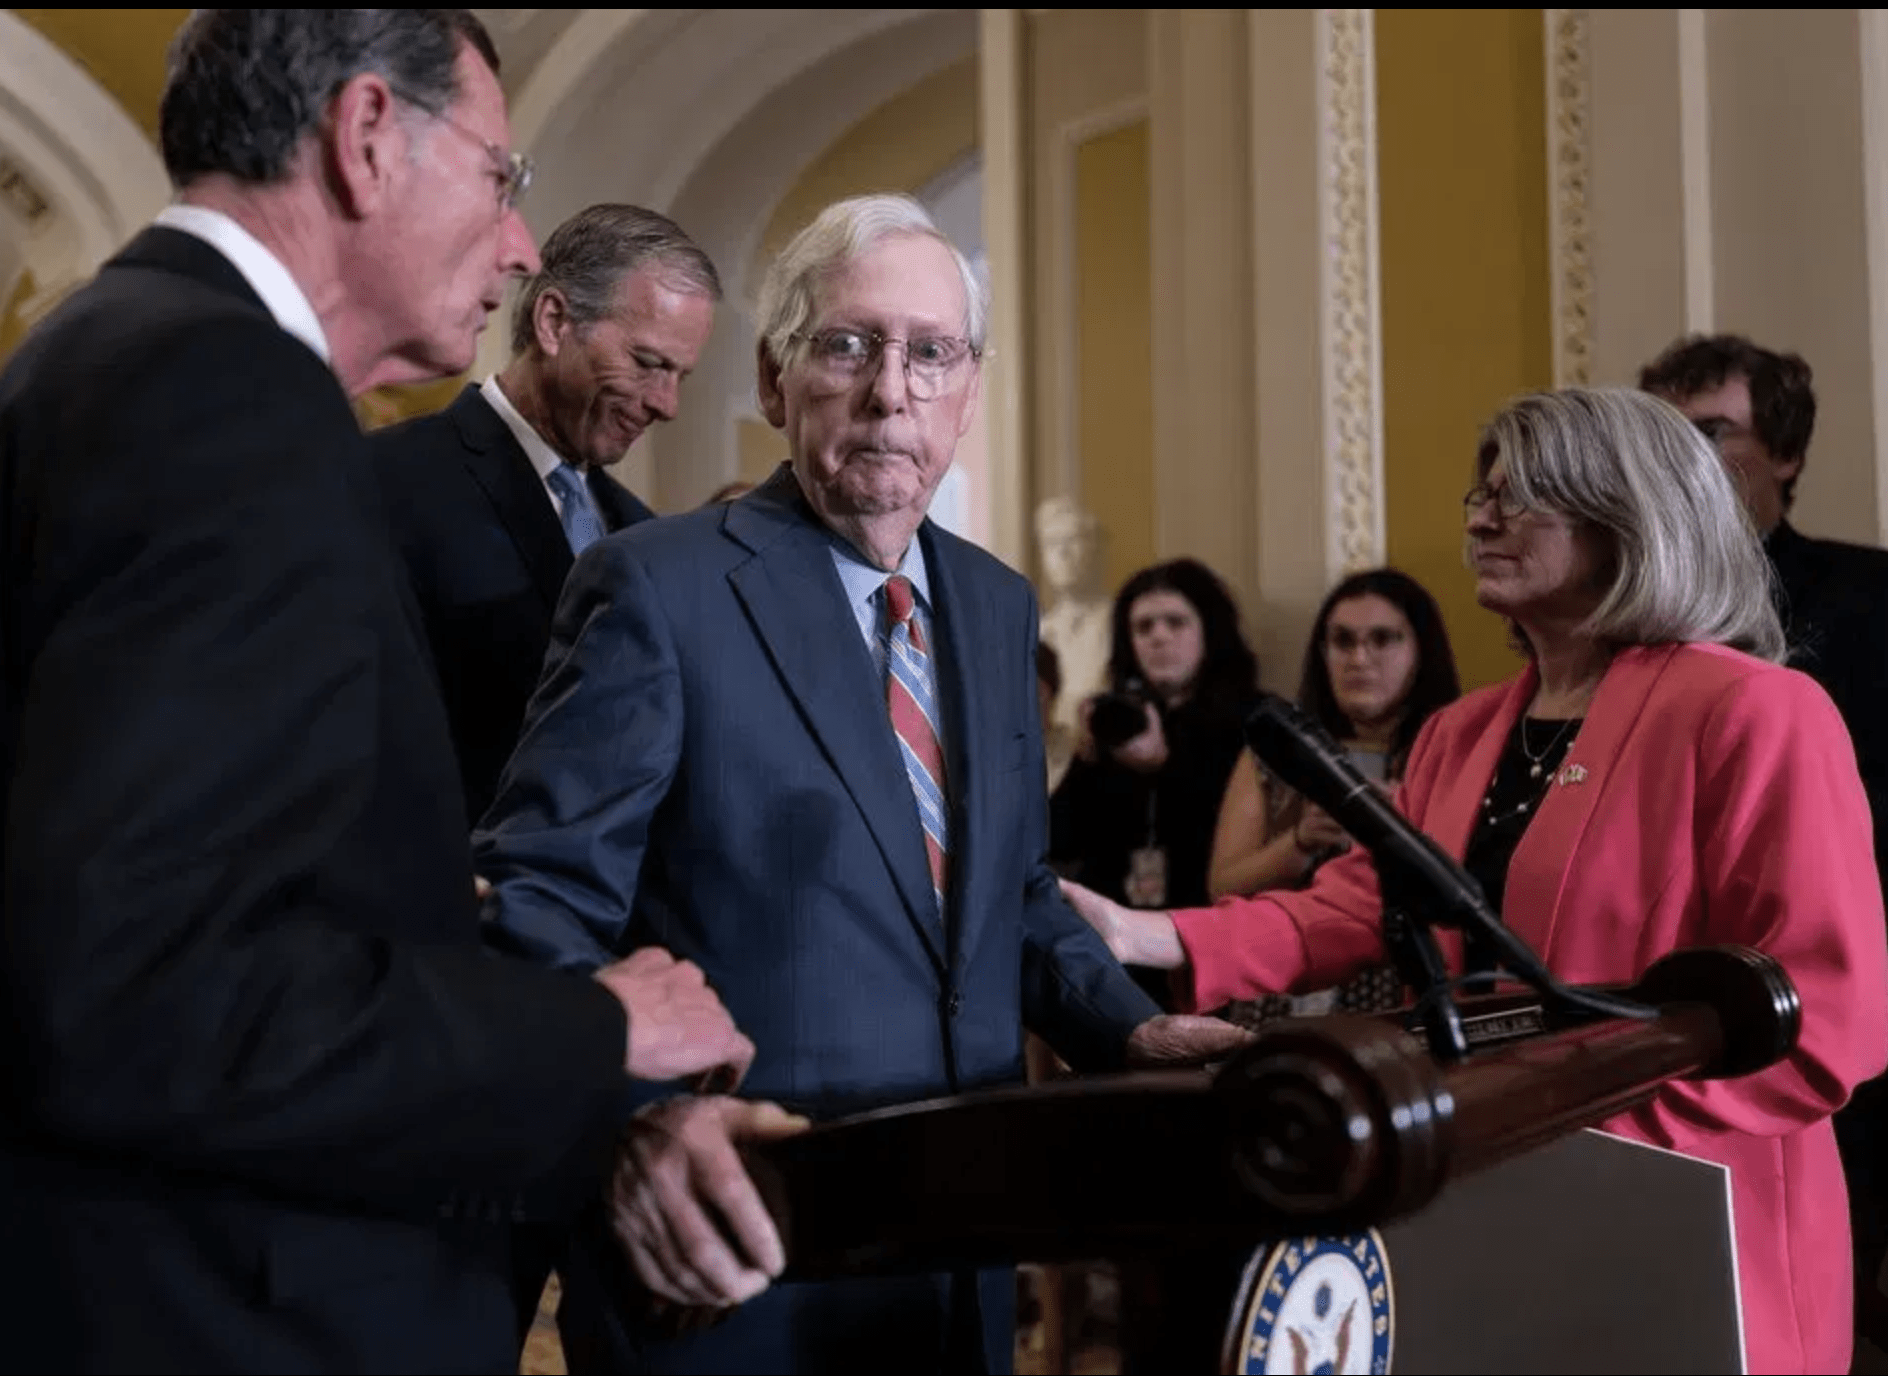 Senate Minority Leader Mitch McConnell, R-Ky., center, is helped by, from left, Sen. John Barrasso, R-Wyo., Sen. John Thune, R-S.D., and Sen. Joni Ernst, R-Iowa, after the 81-year-old GOP leader froze at the microphones as he arrived for a news conference, at the Capitol in Washington, Wednesday, July 26, 2023.